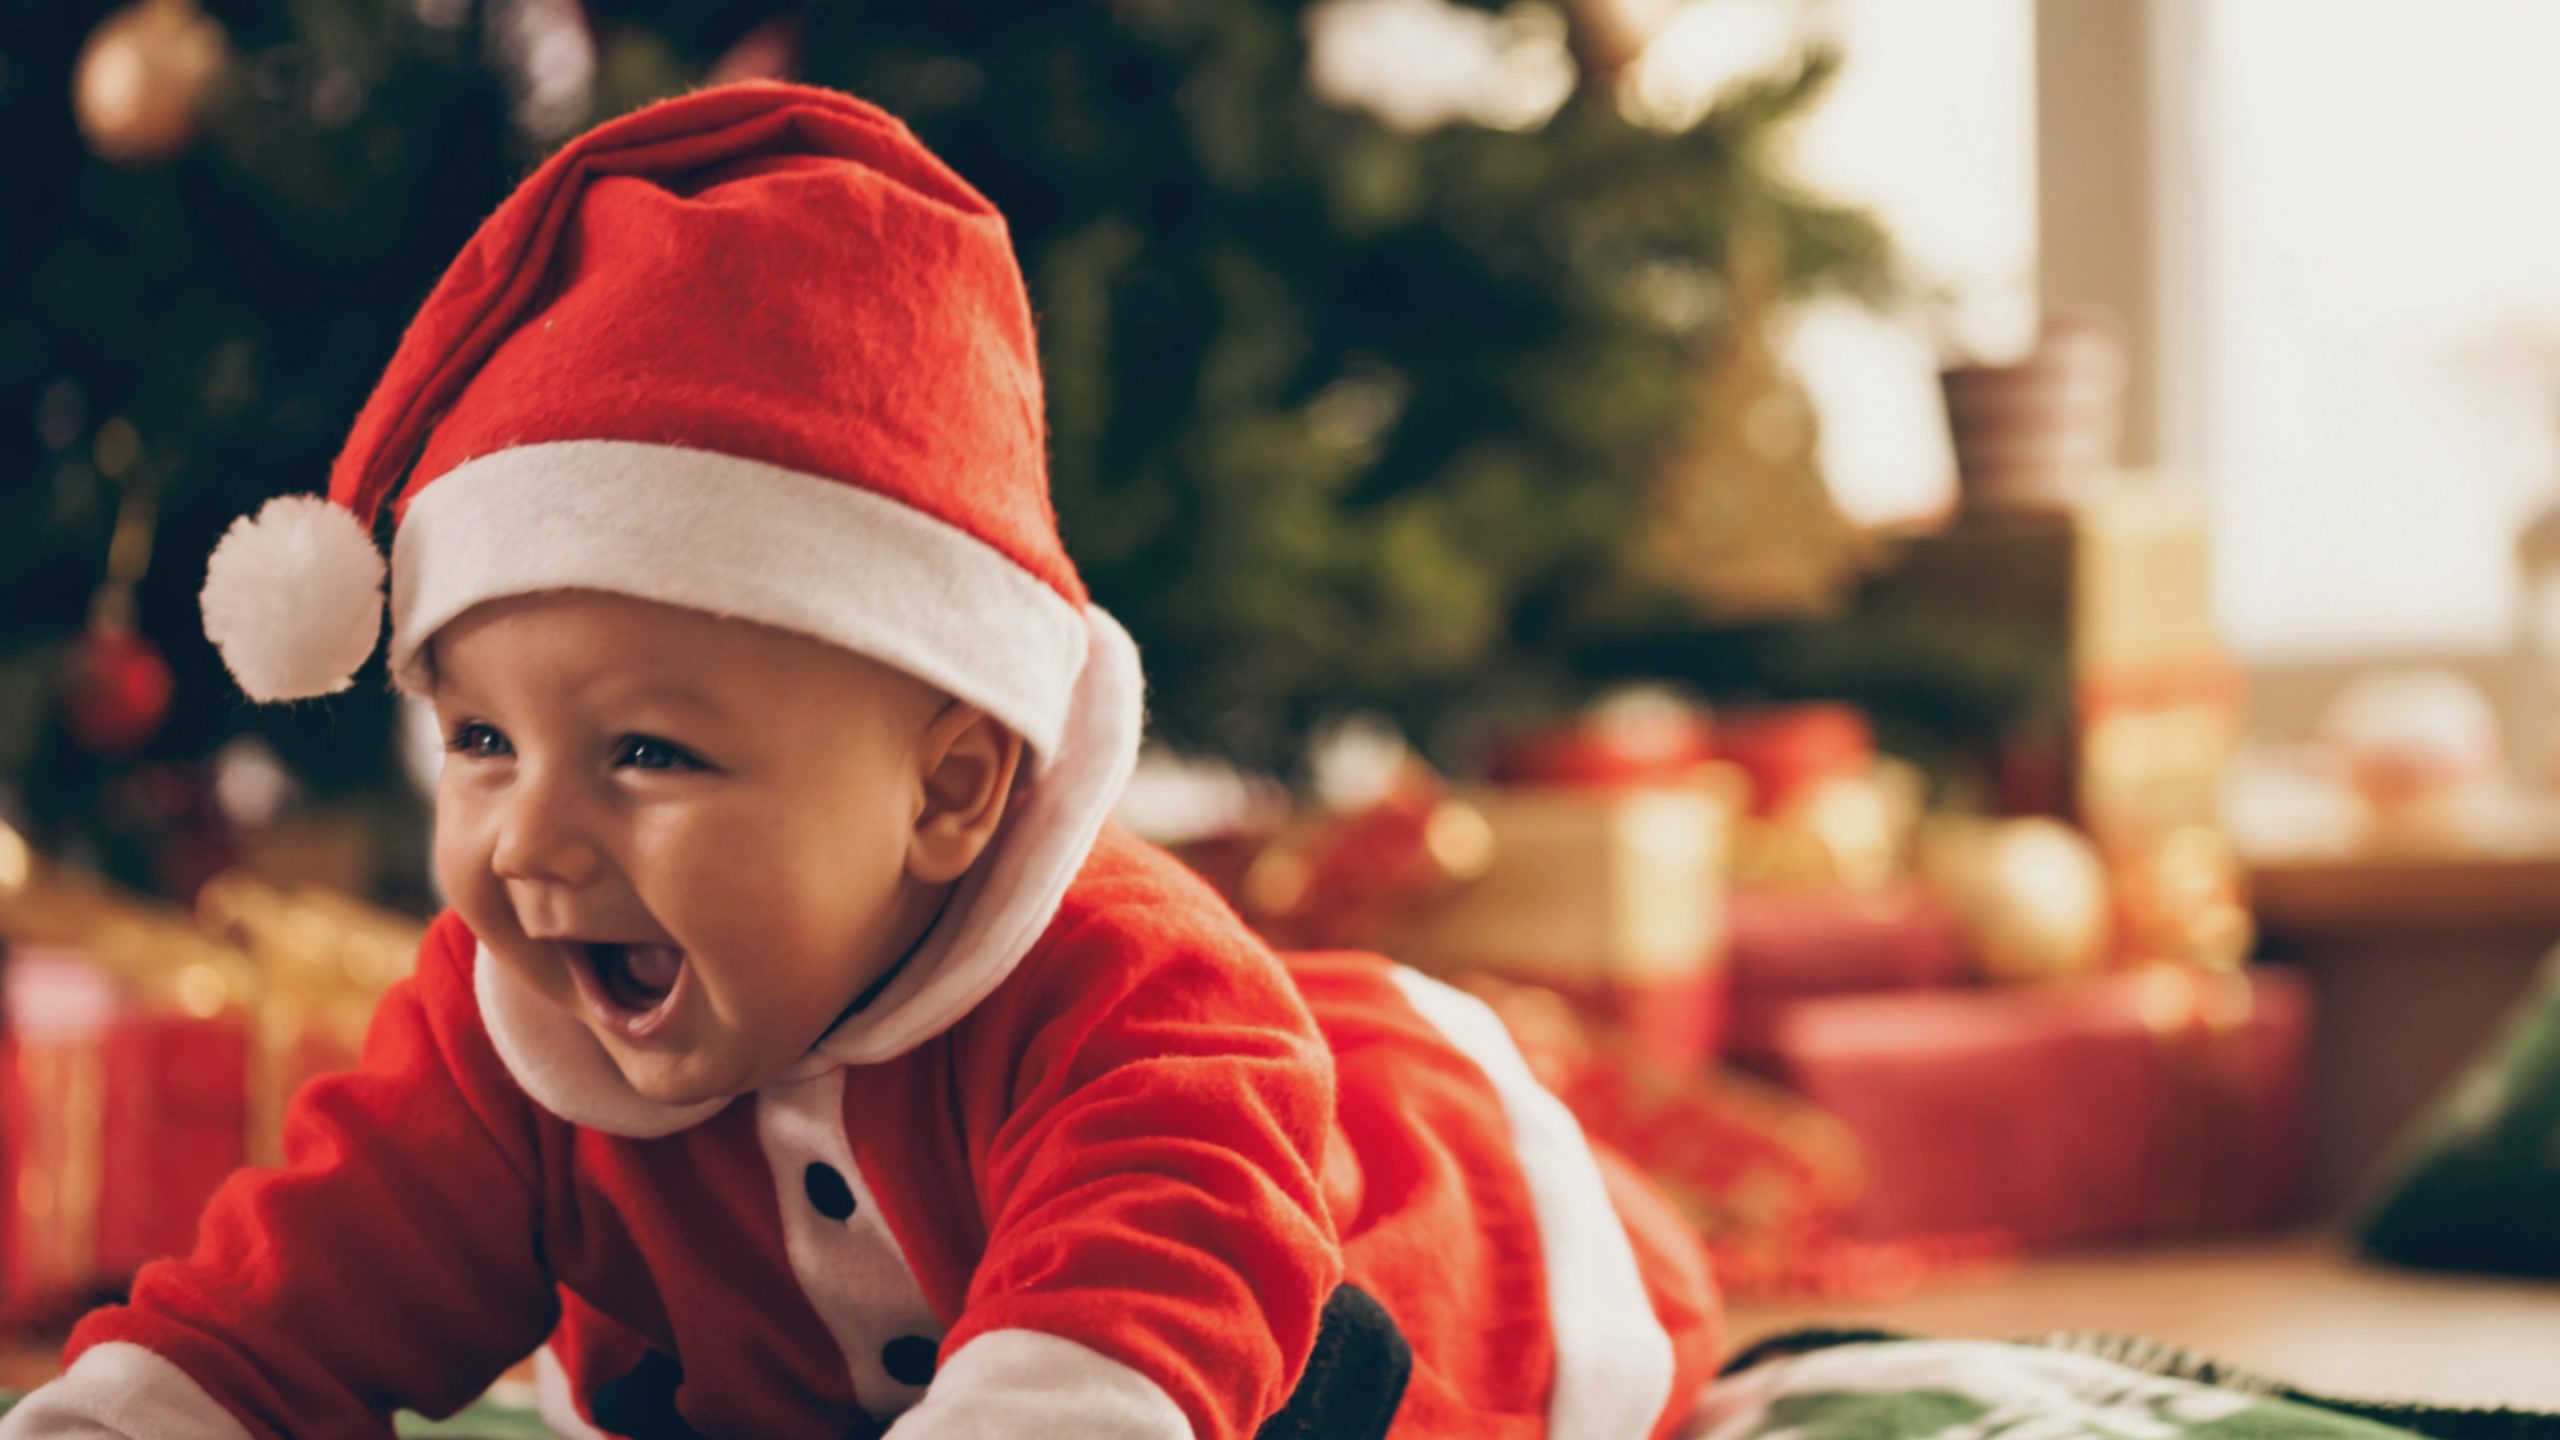 Cute Christmas Baby Images Hd - 2560x1440 Wallpaper 